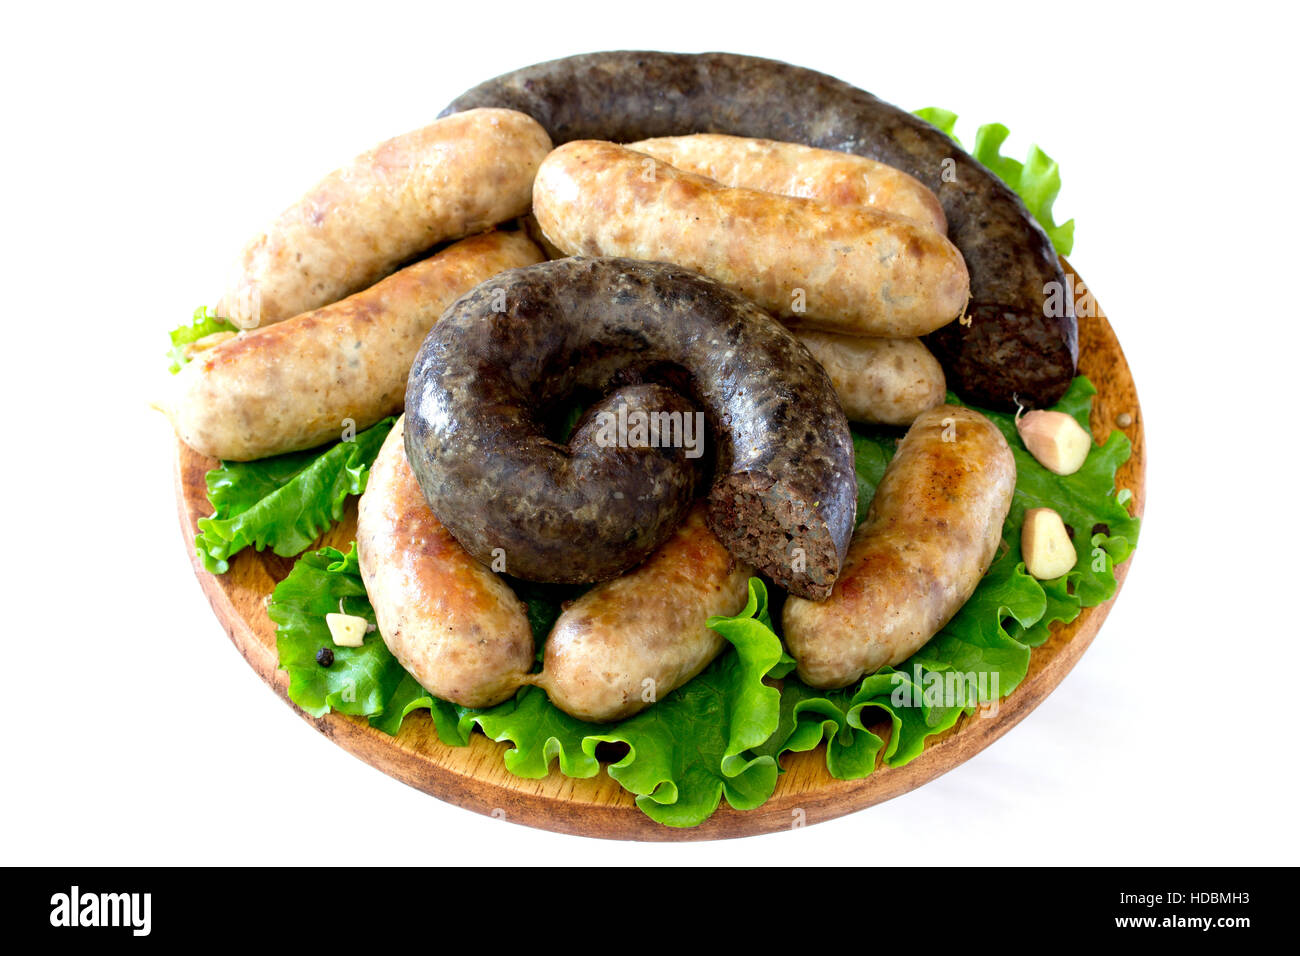 Homemade liver sausage meat and raw sausage on a wooden board Stock Photo